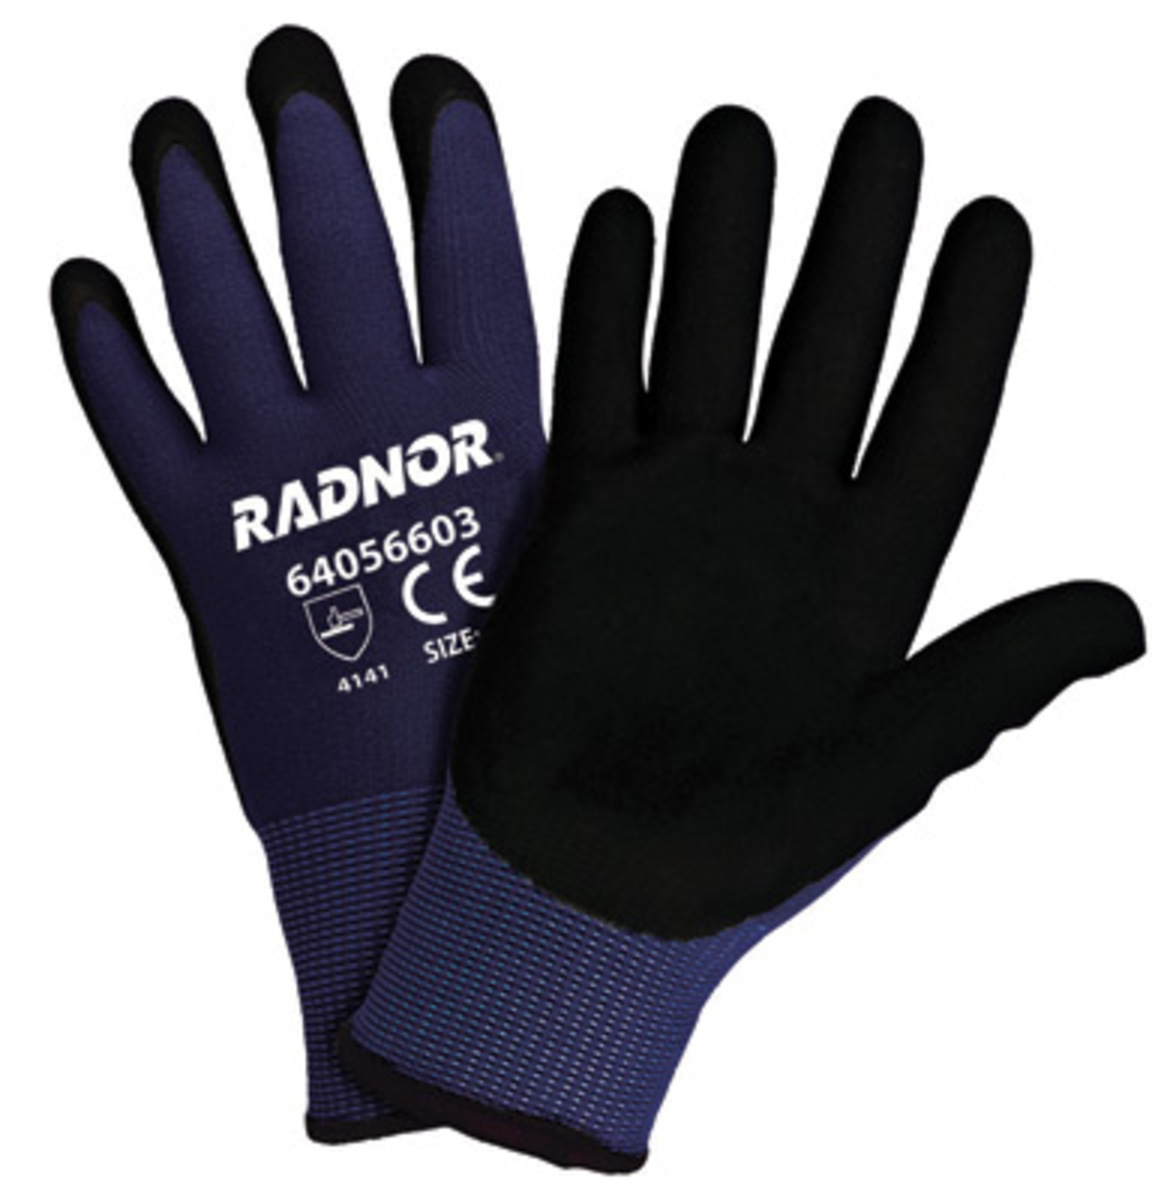 RADNOR® Large 15 Gauge Black Nitrile And Micro-Foam Palm And Finger Coated Work Gloves With Blue Nylon Liner And Knit Wrist